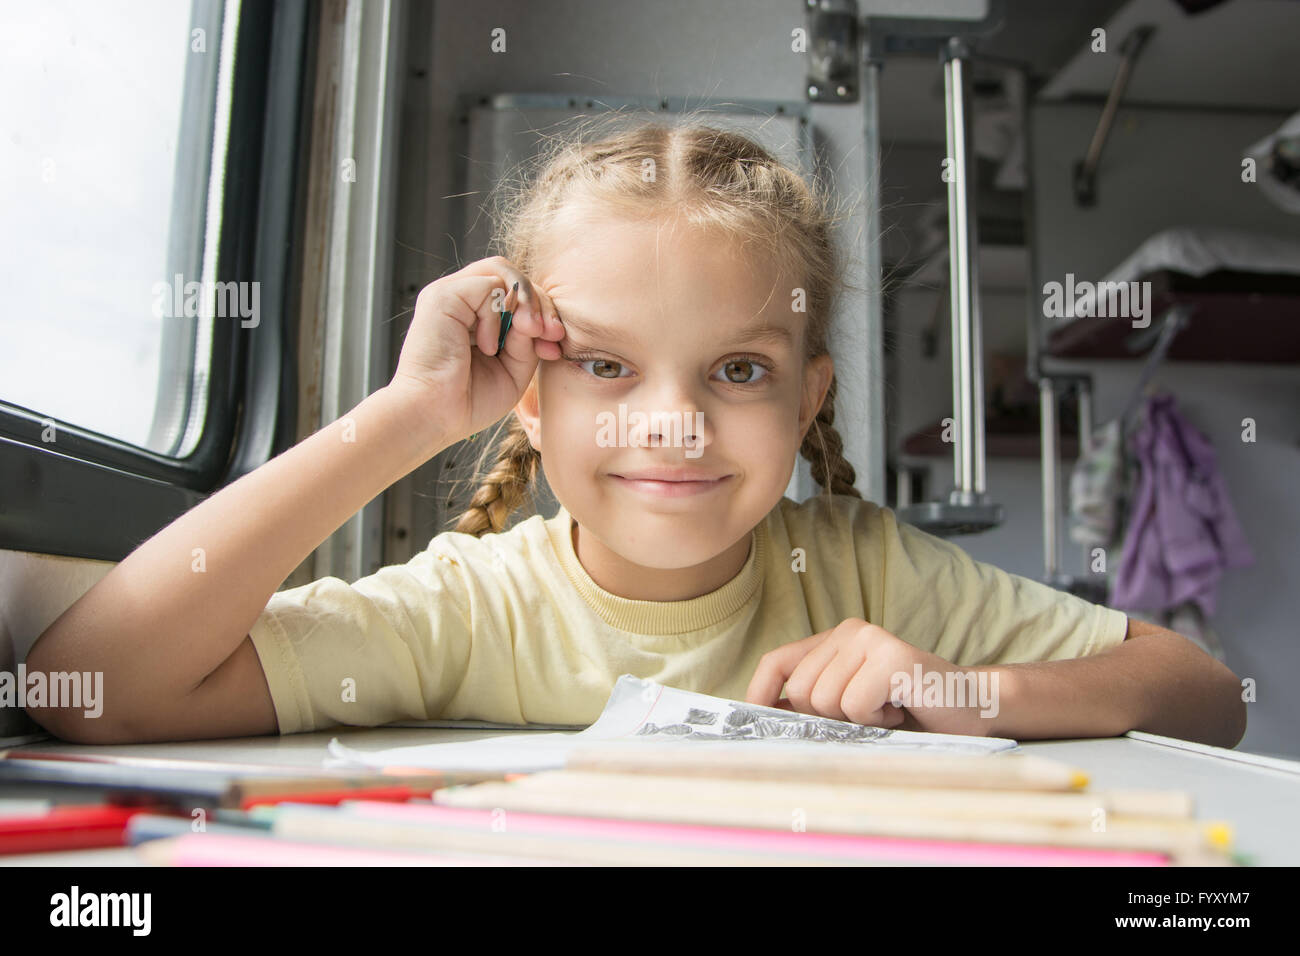 Girl happily looks into the frame, drawing pencils in a train Stock Photo